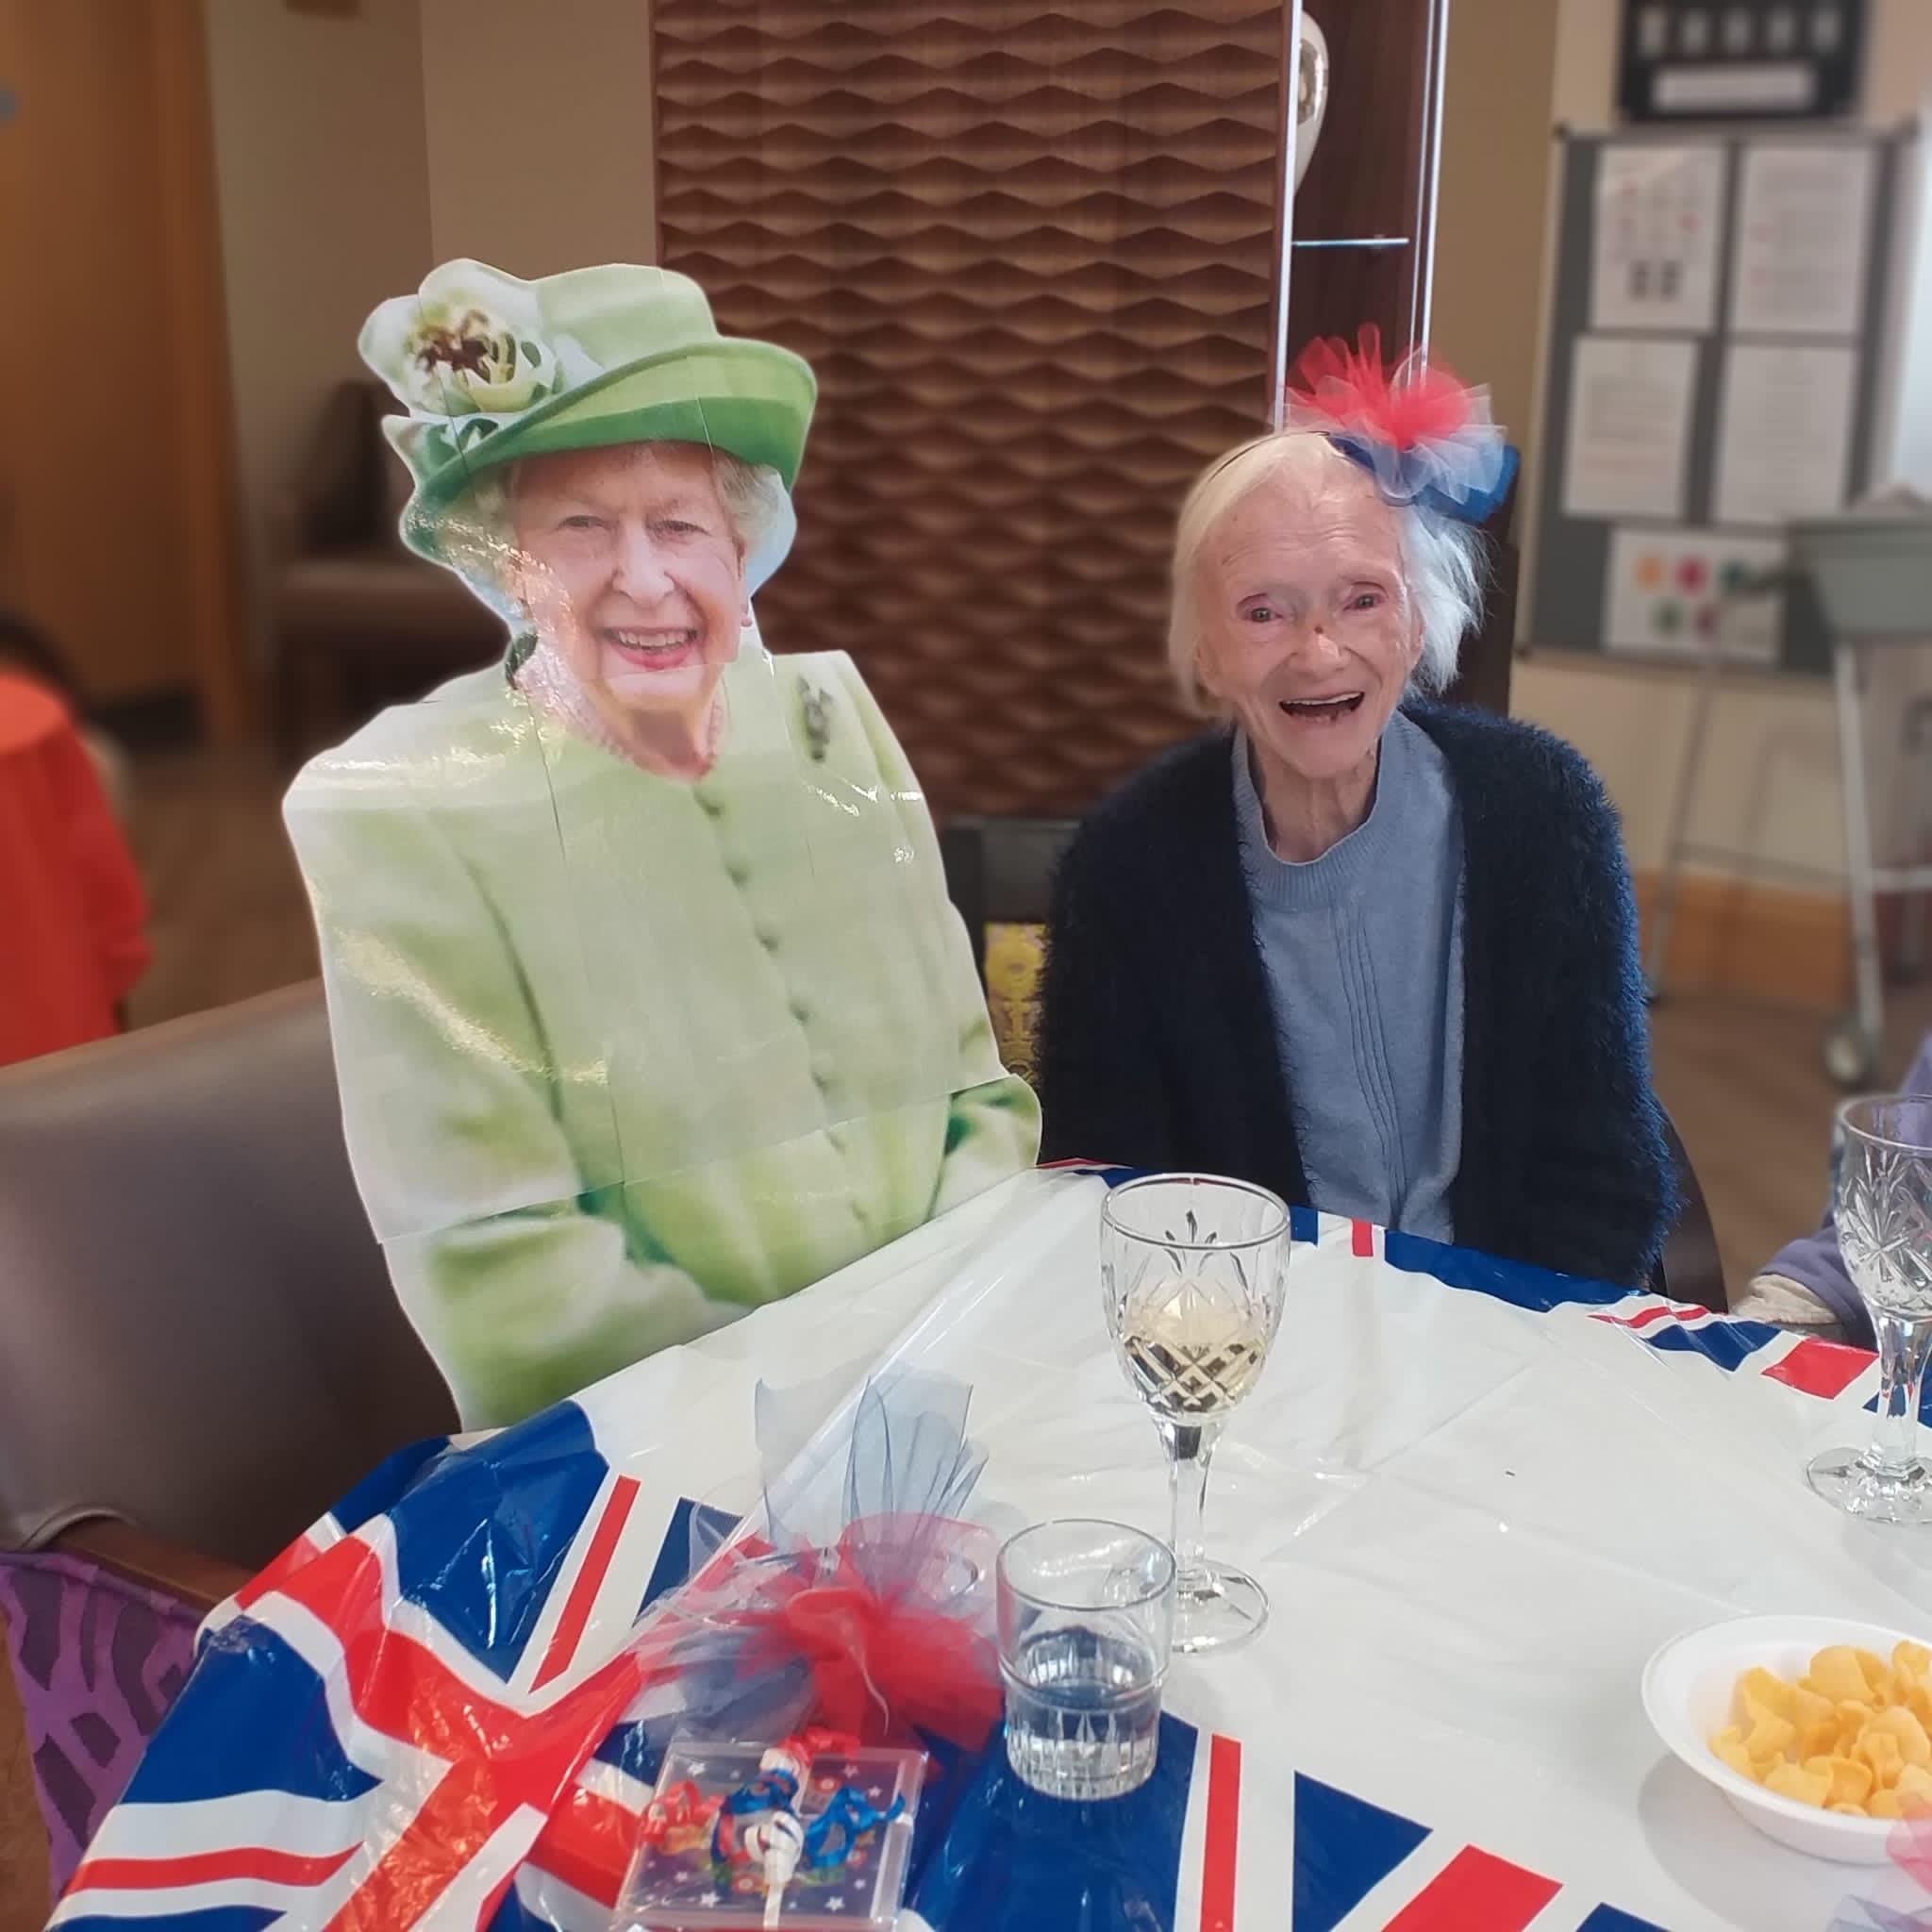 Resident Enjoying Royal Celebration With Queen Themed